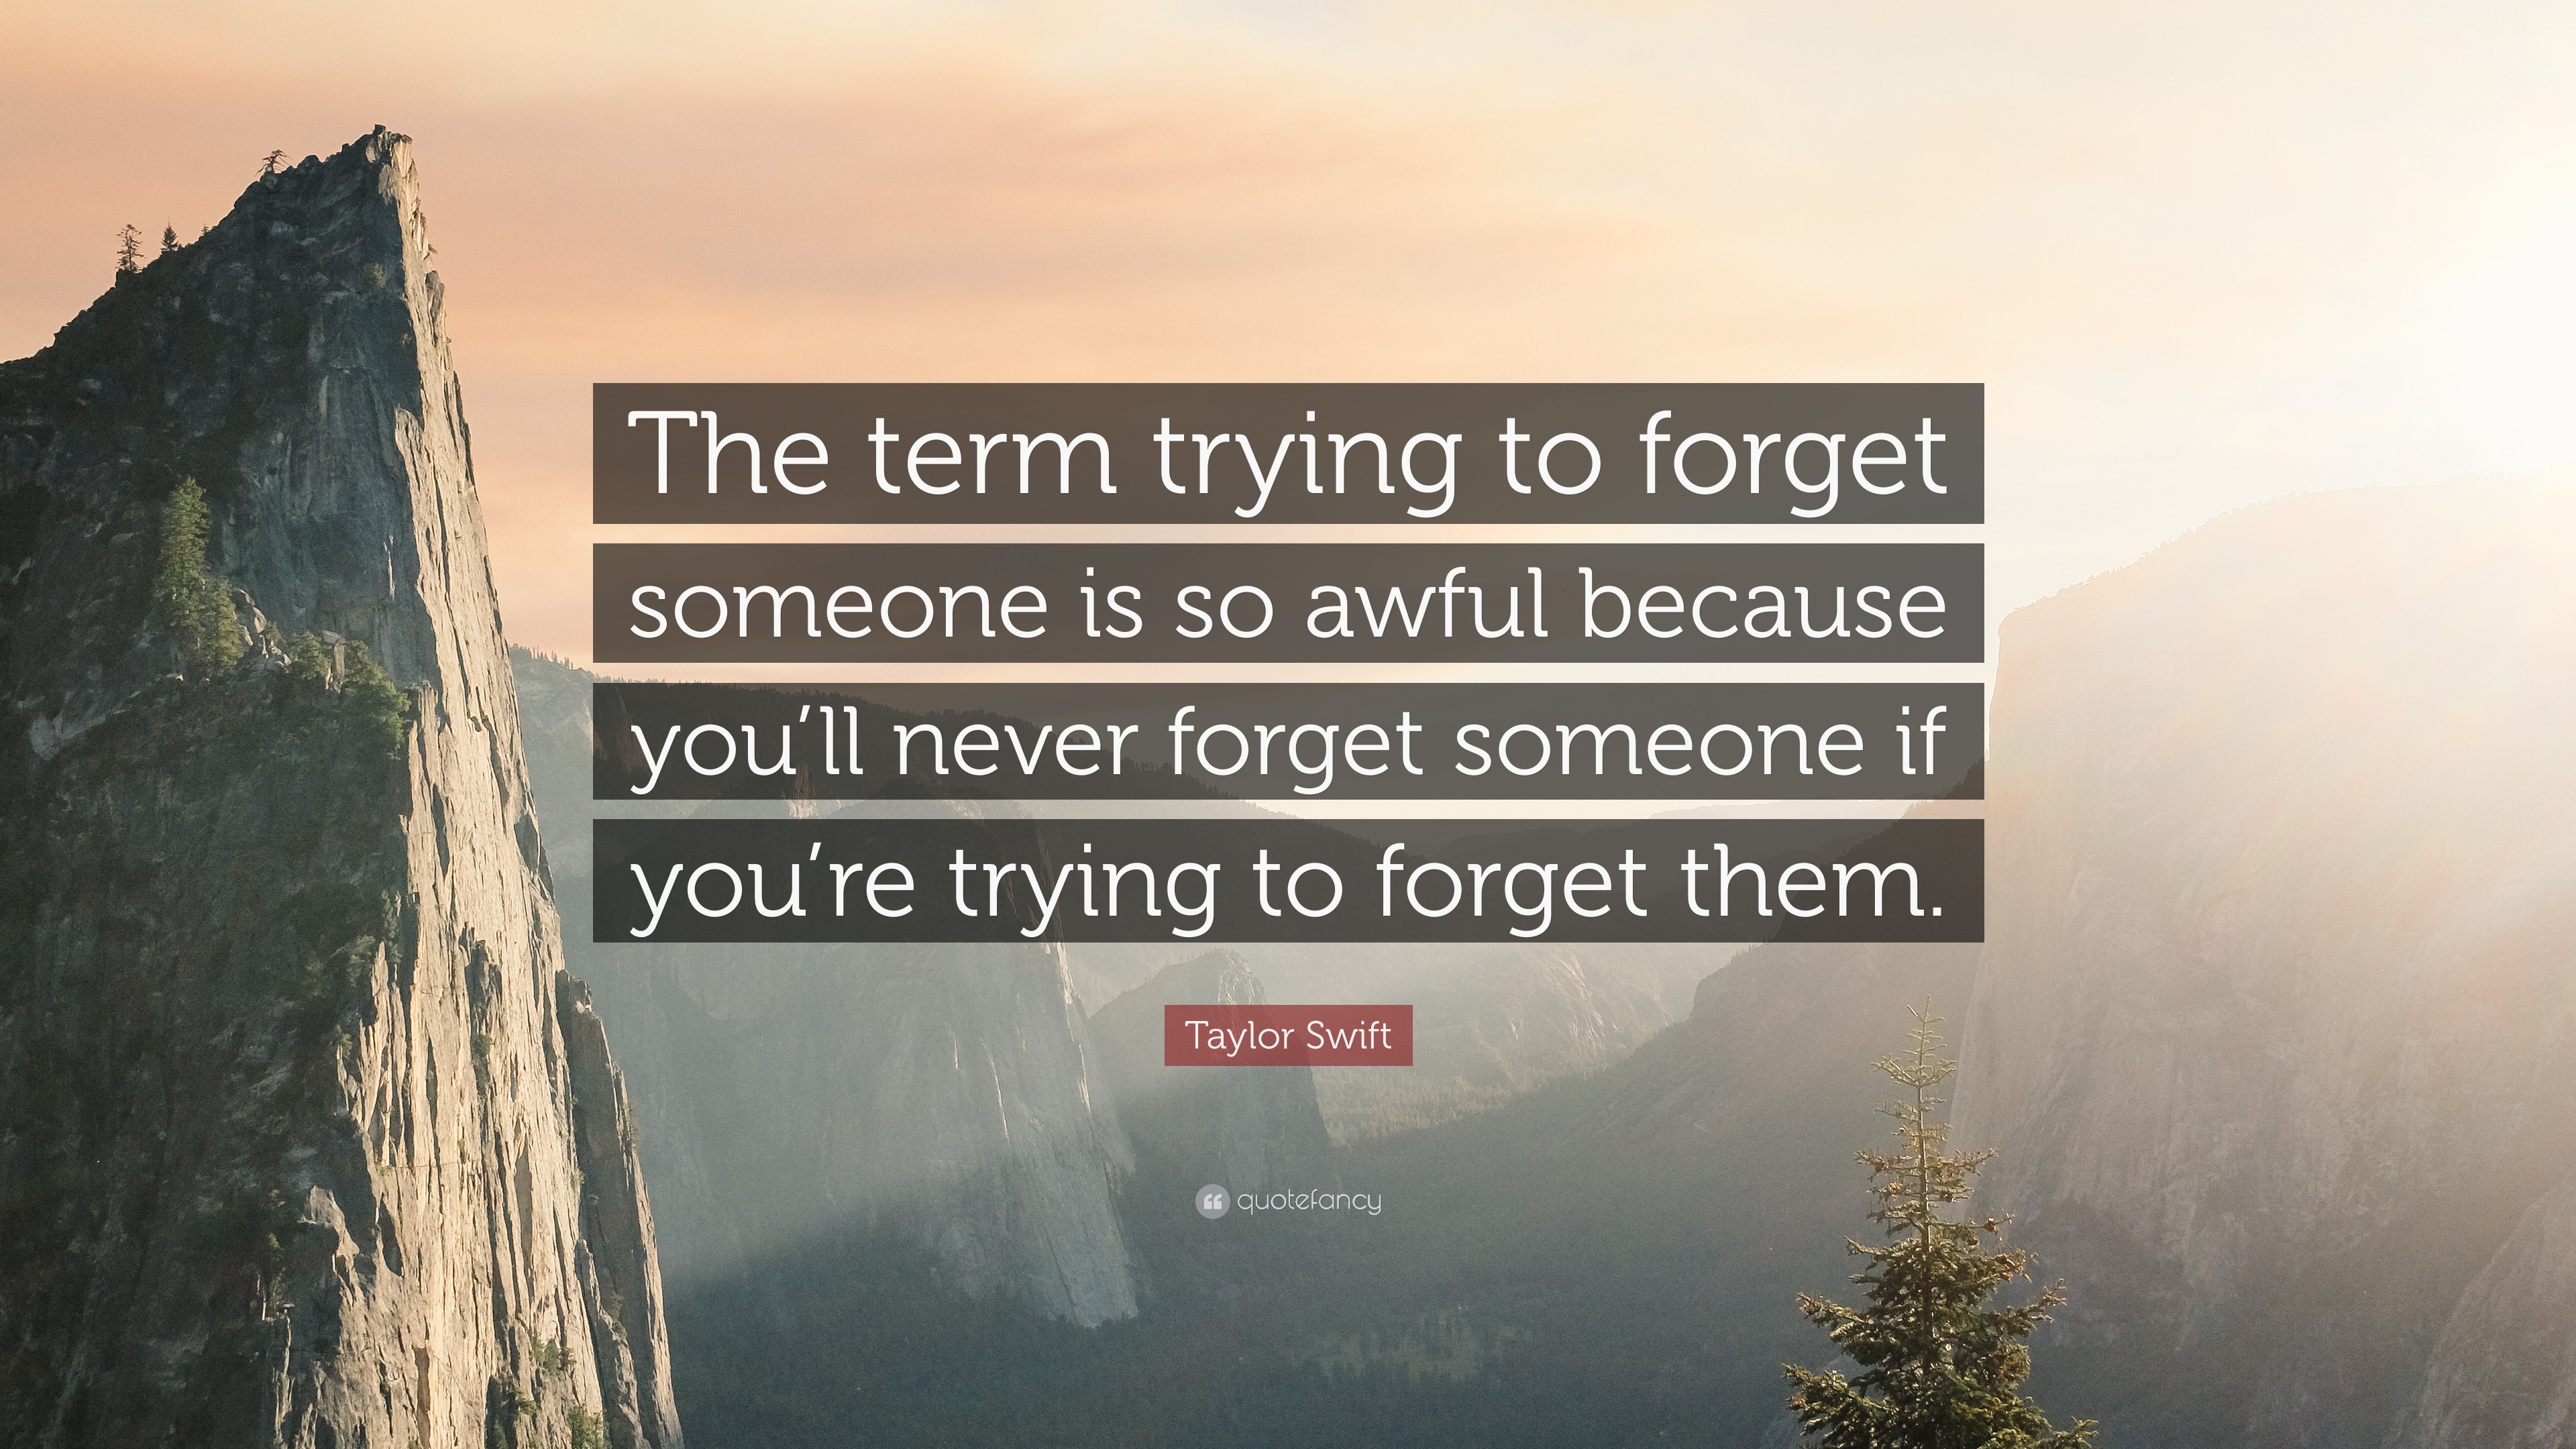 Taylor Swift Quote “the Term Trying To Forget Someone Is So Awful